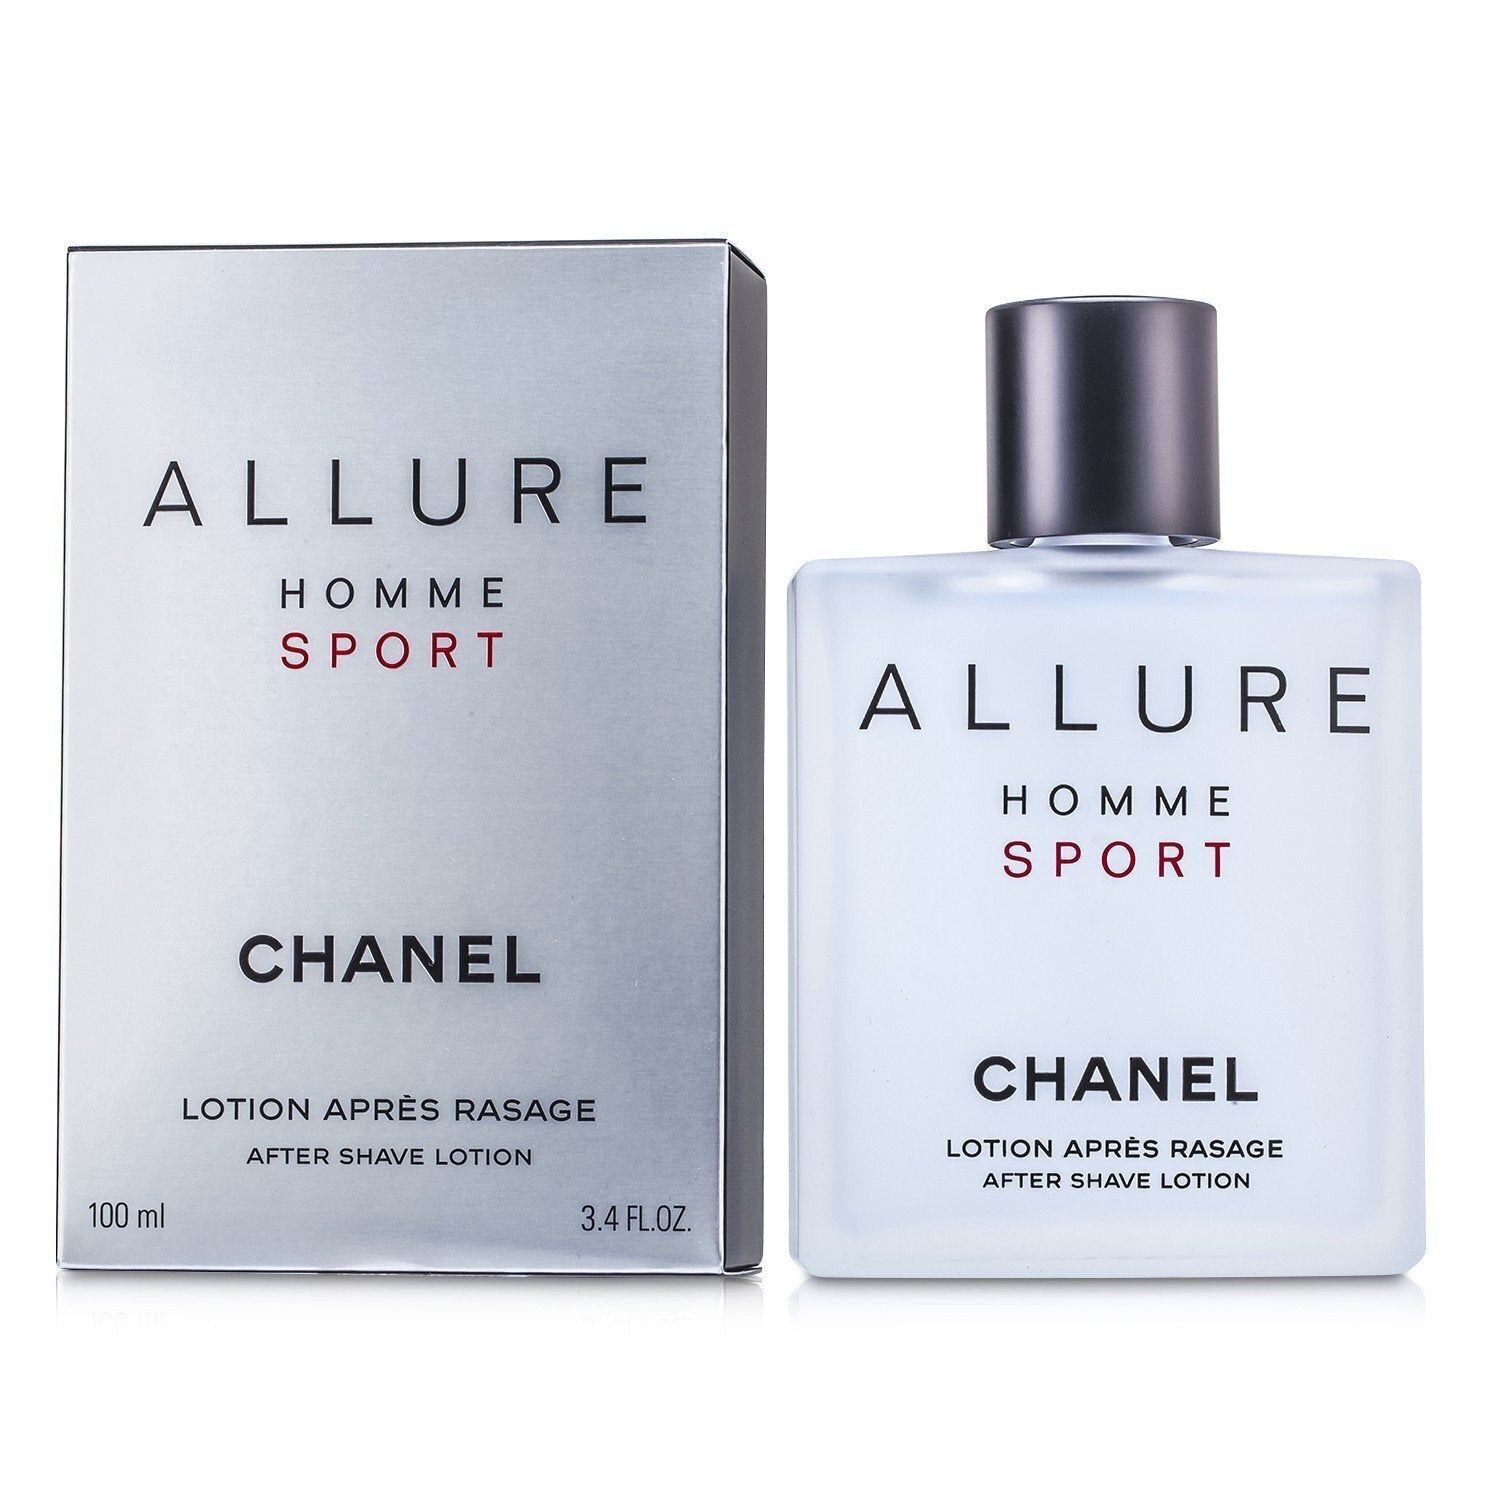 A packaged 100ml bottle of Chanel Allure Homme Sport after shave lotion